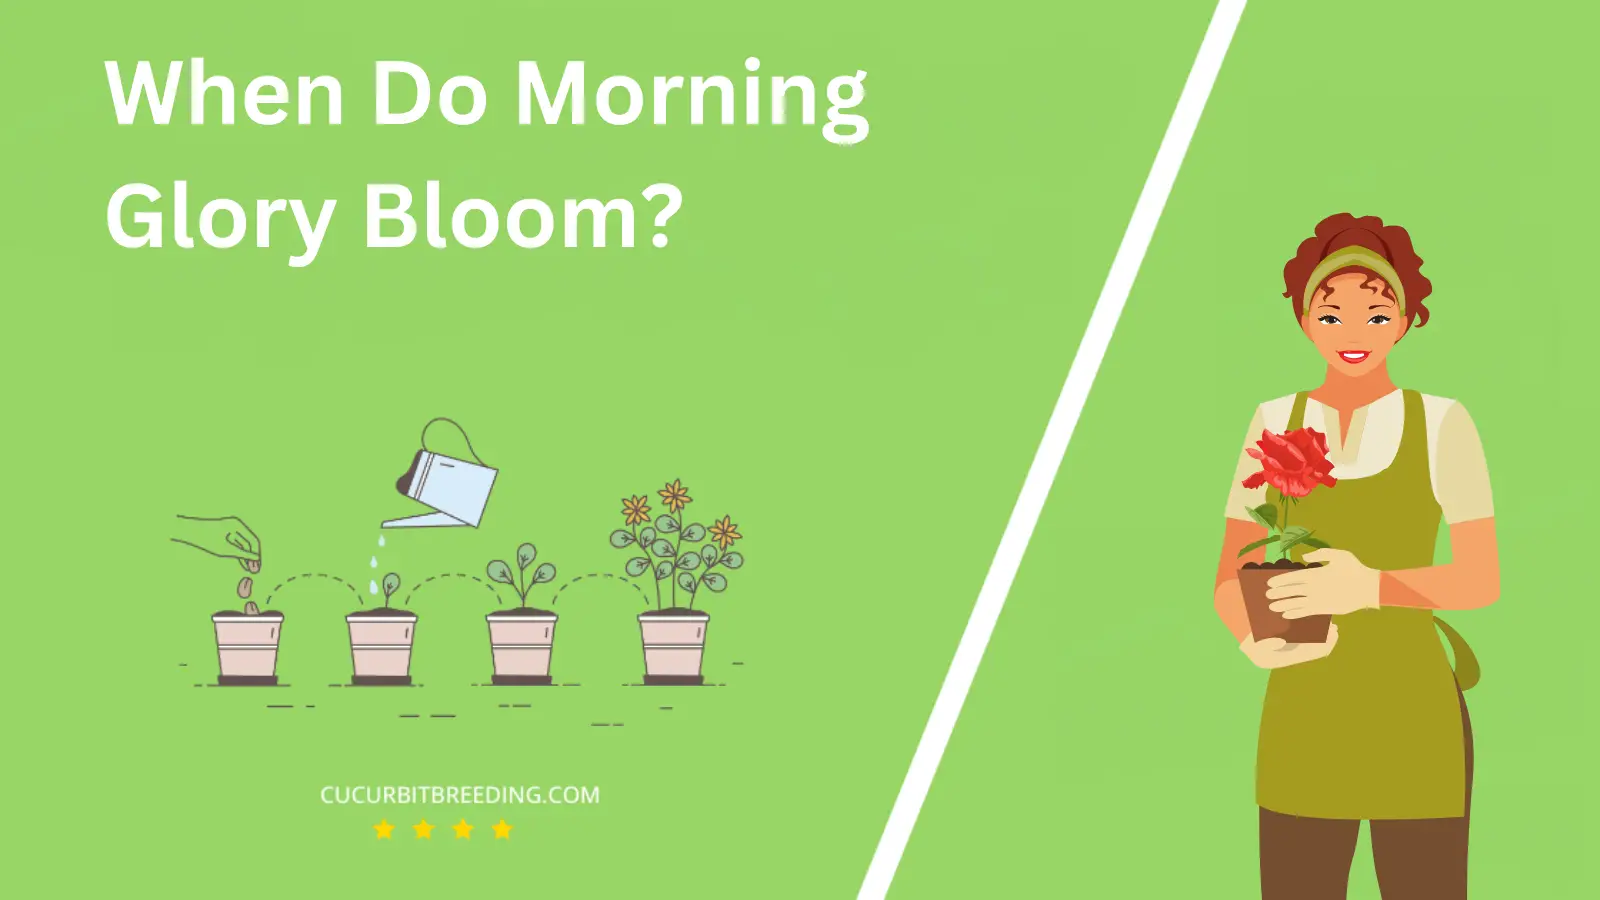 When Do Morning Glory Bloom?